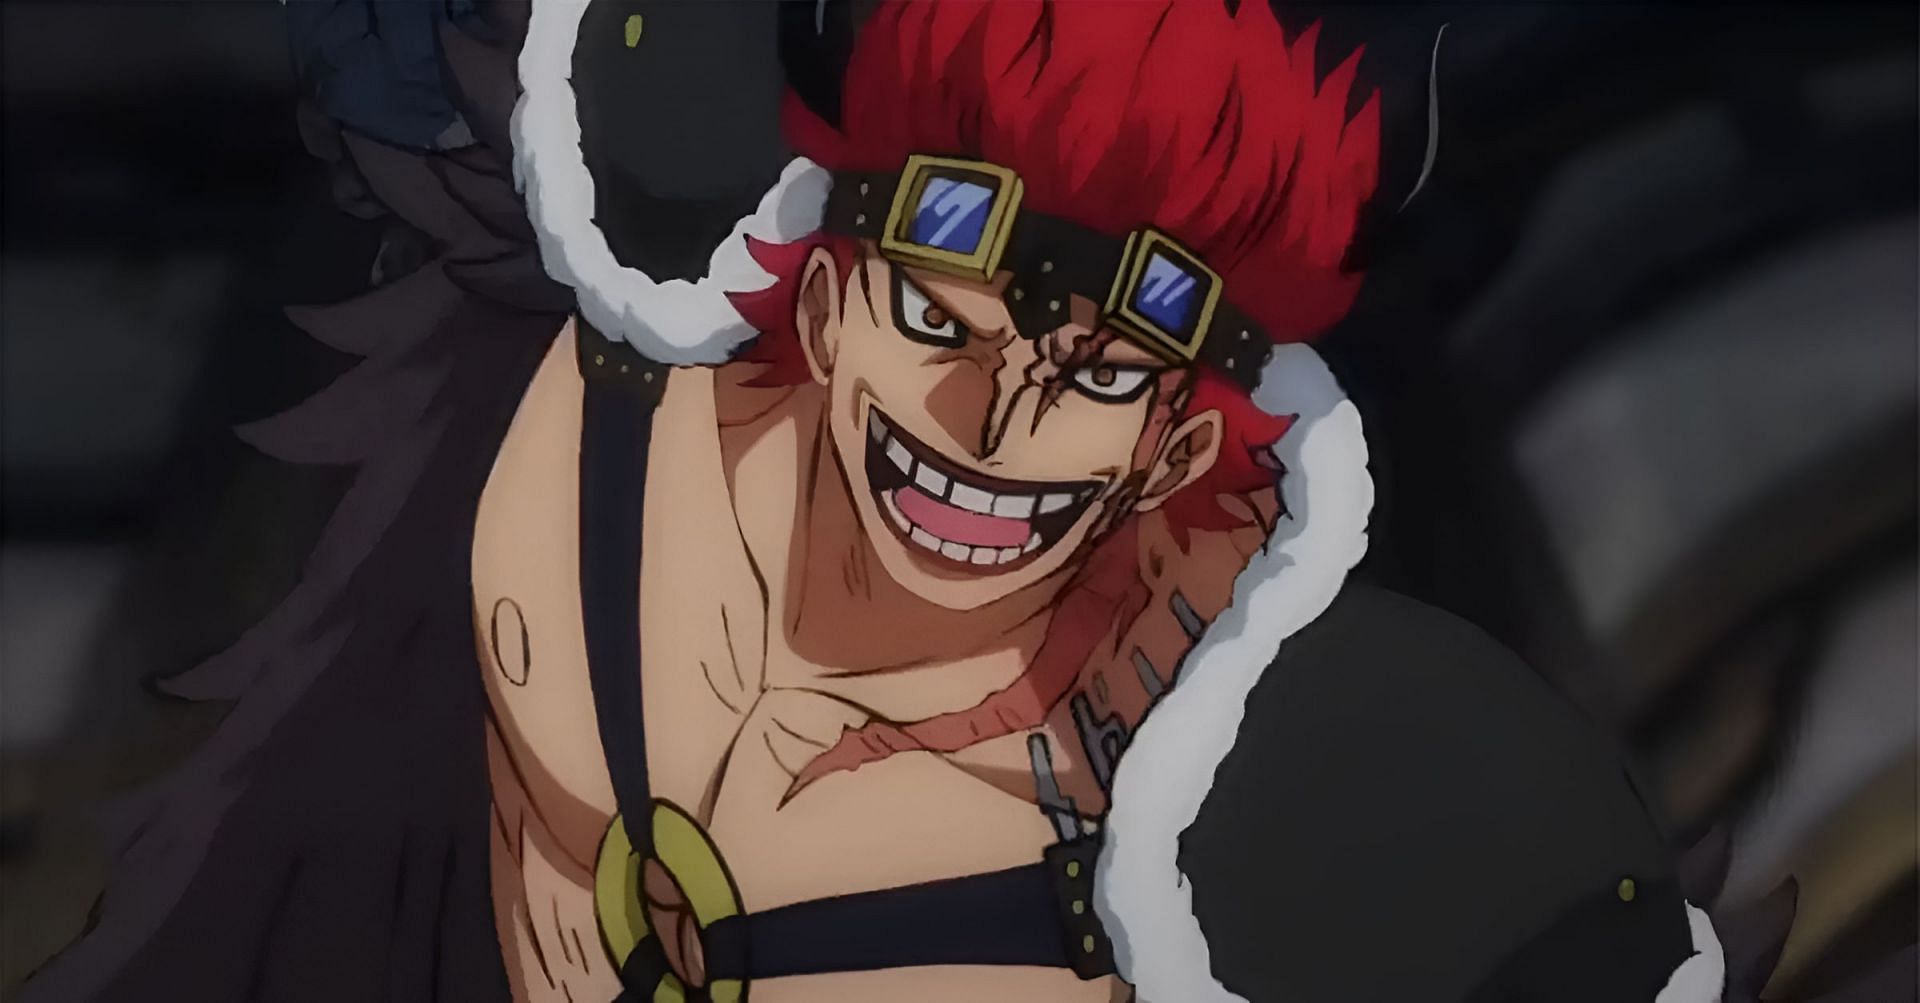 Kidd as seen in the anime (Image via Toei Animation)